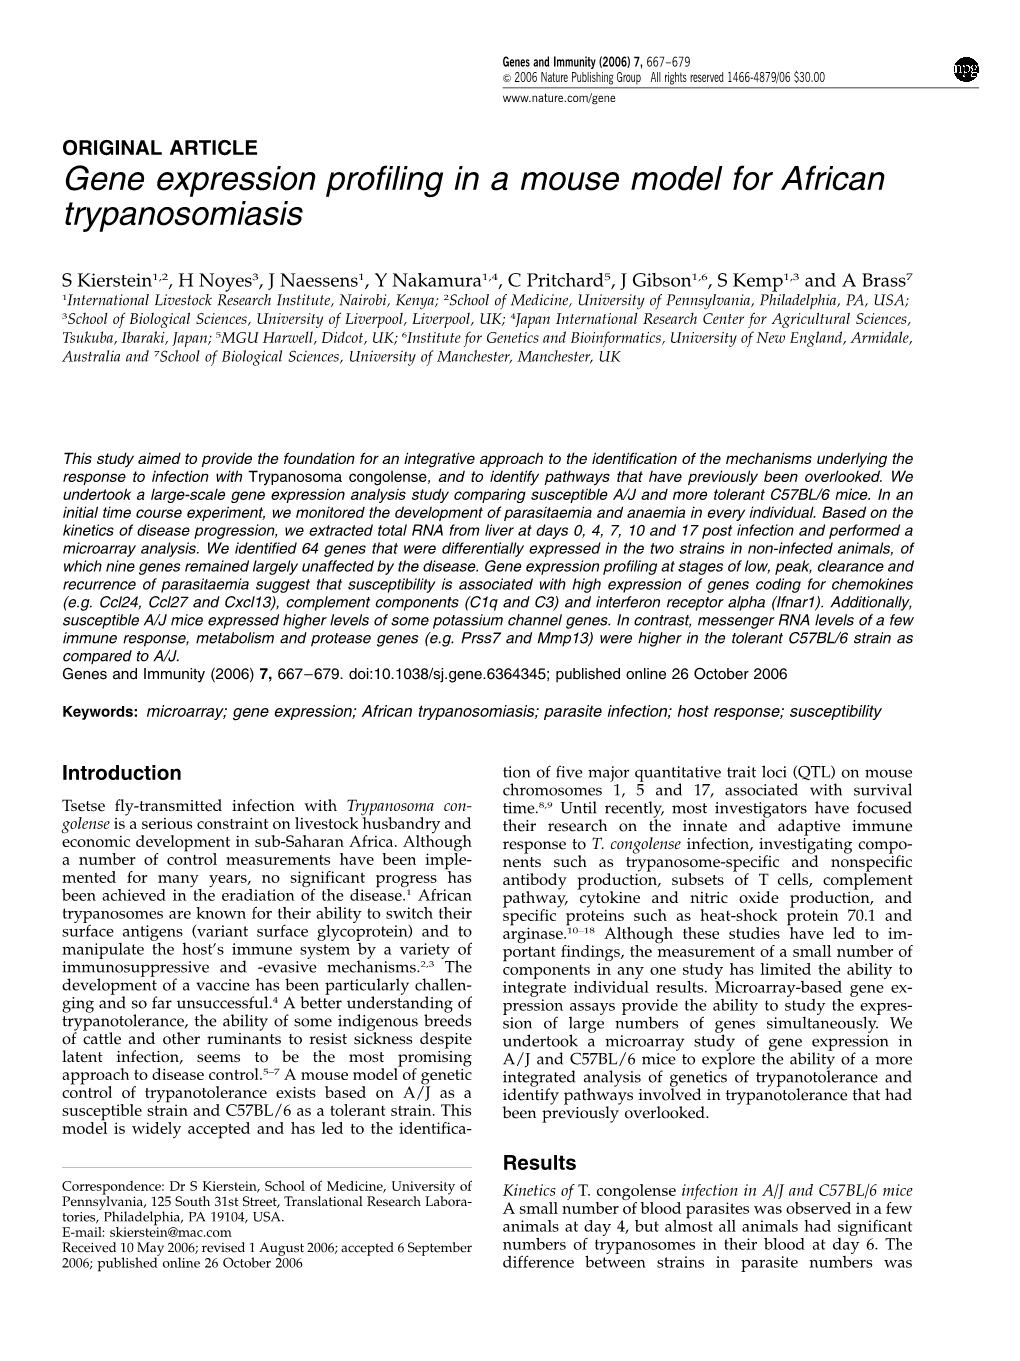 Gene Expression Profiling in a Mouse Model for African Trypanosomiasis